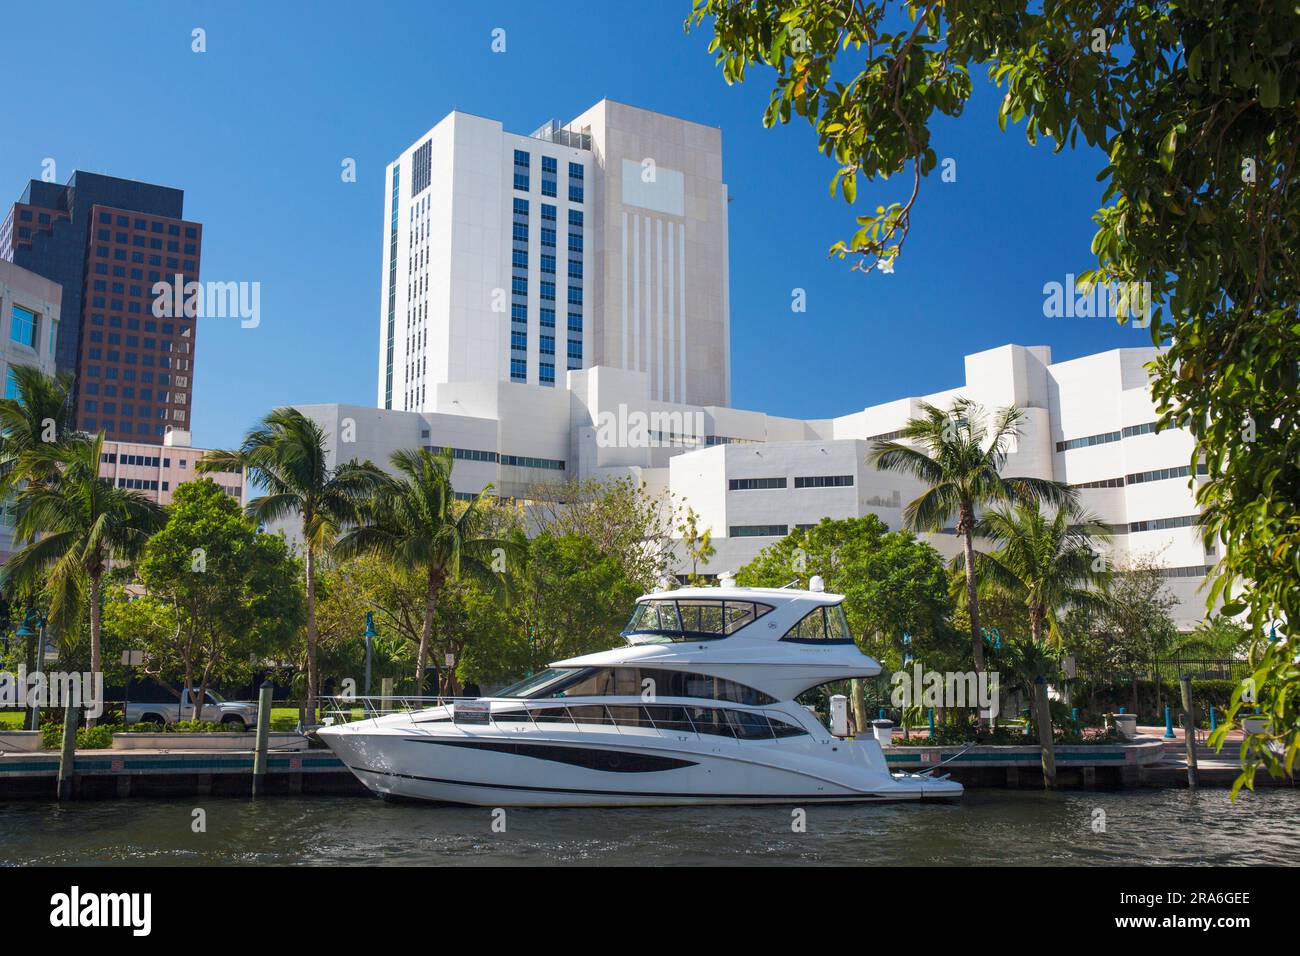 Fort Lauderdale, Florida, USA. View across the New River, luxury motor cruiser moored beneath modern Downtown architecture. Stock Photo